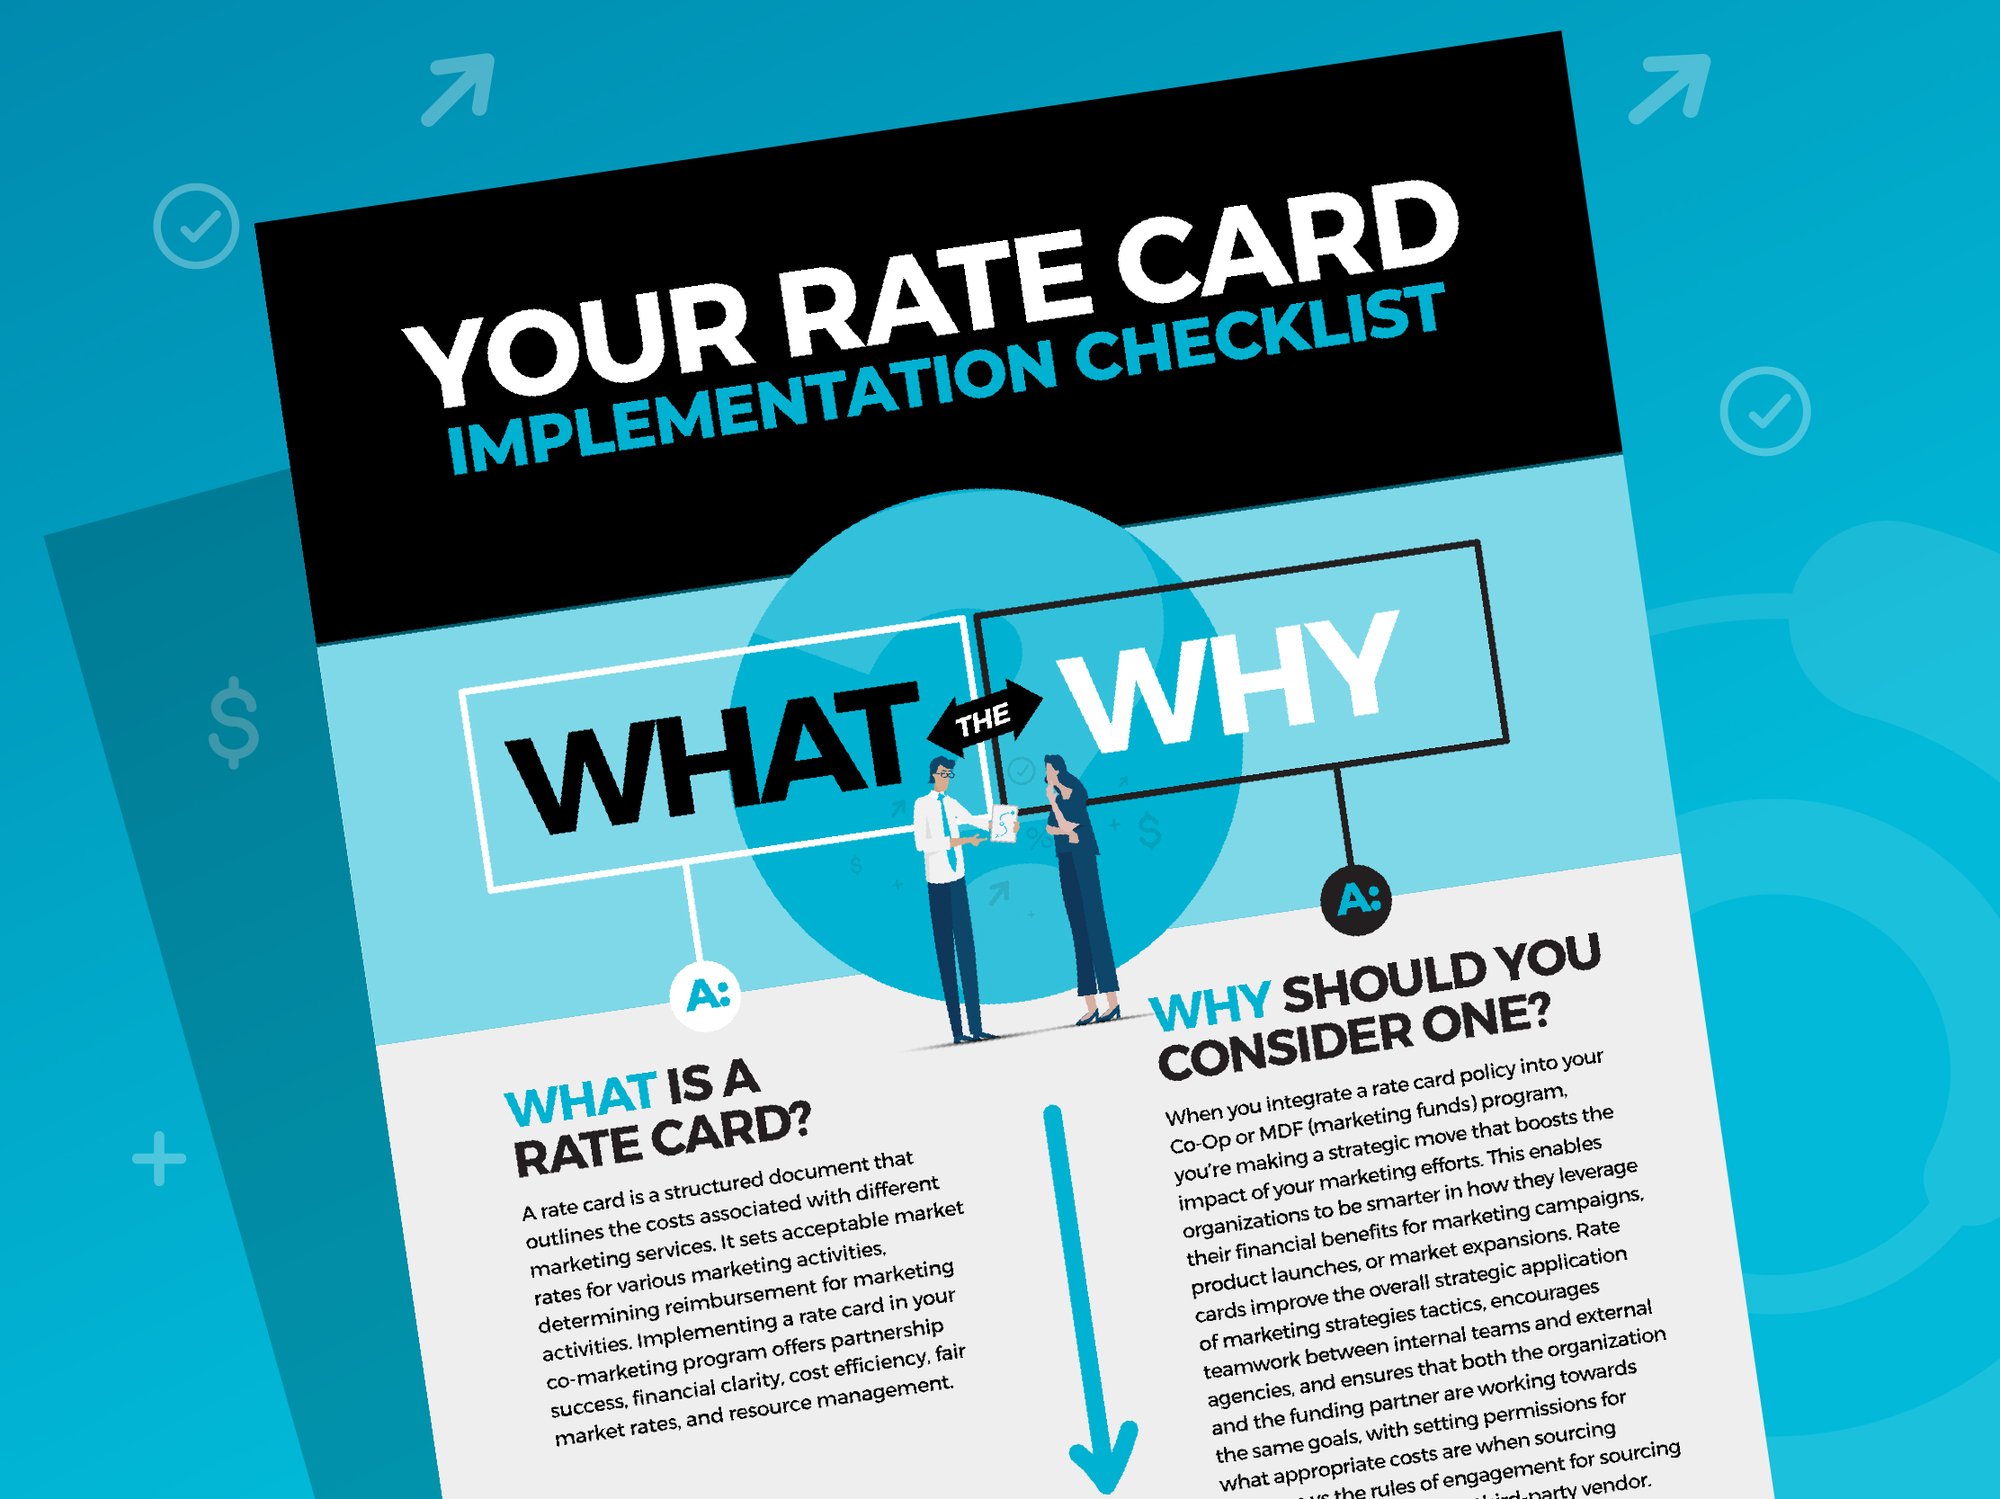 MKTG-34-Rate-Card-Checklist-Infographic-Promo_Main Body (800x600px)